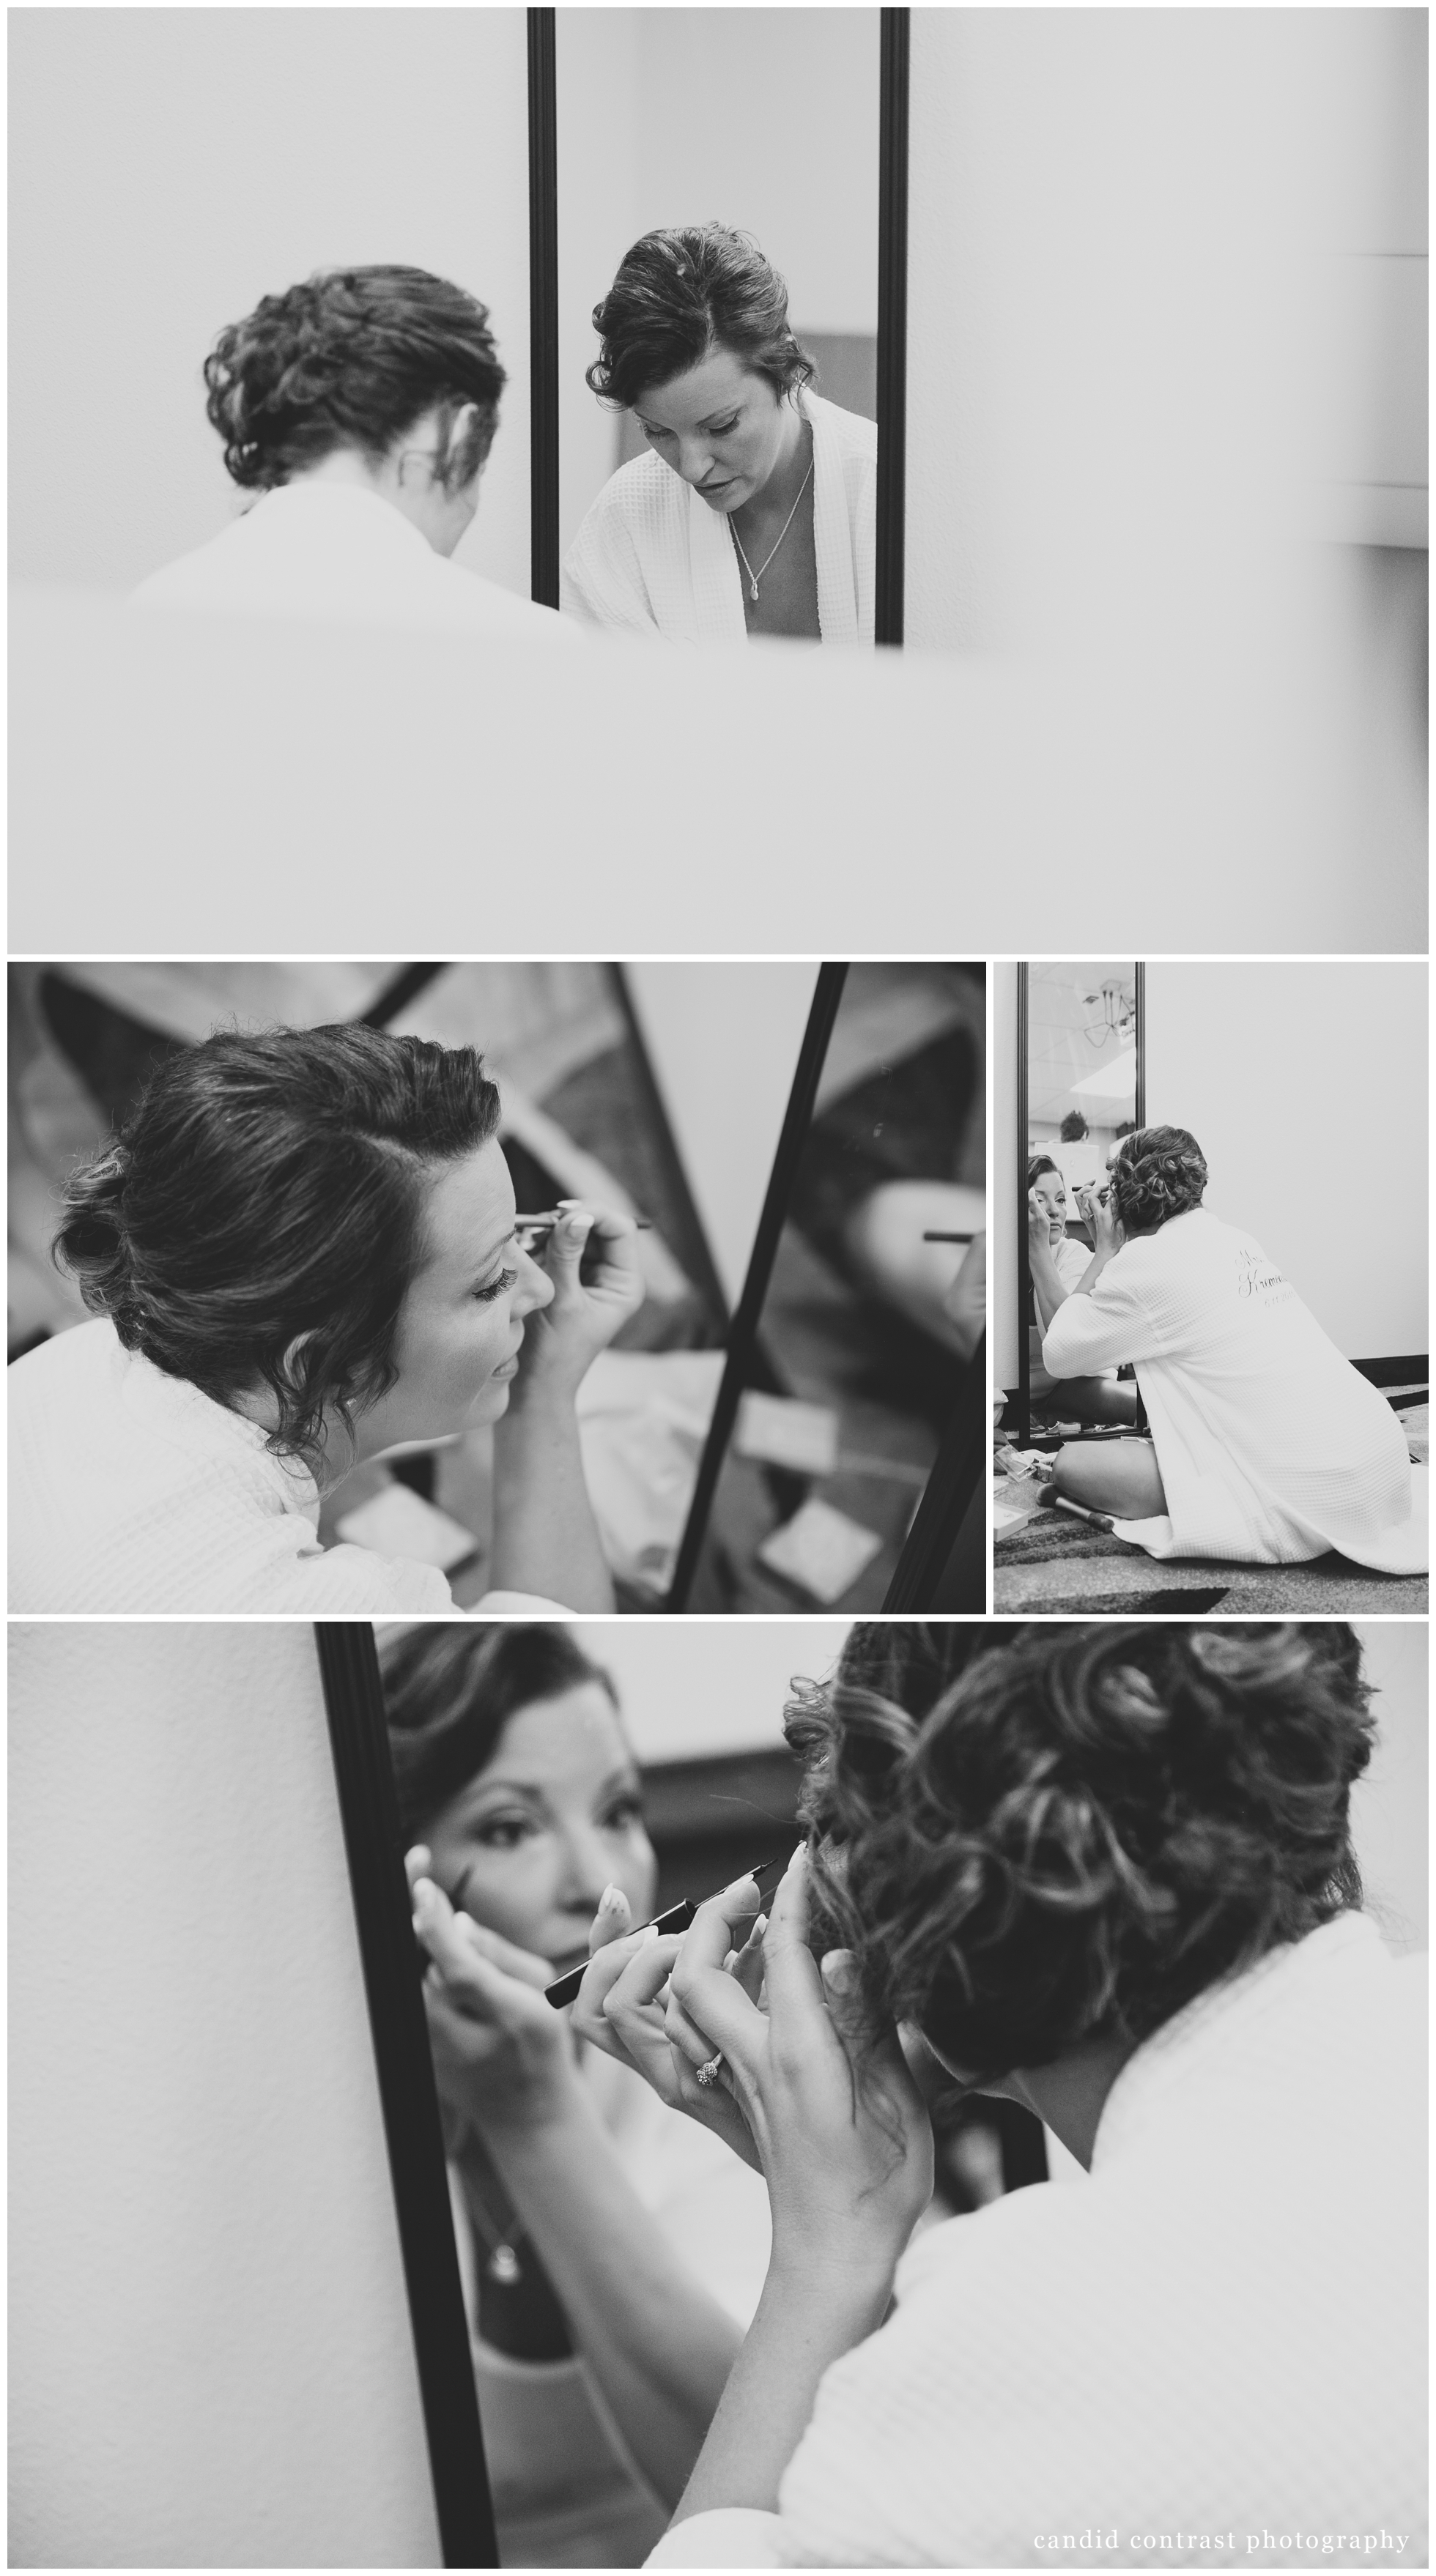 getting ready for a bellevue iowa outdoor wedding at the shore event center, iowa wedding photographer candid contrast photography